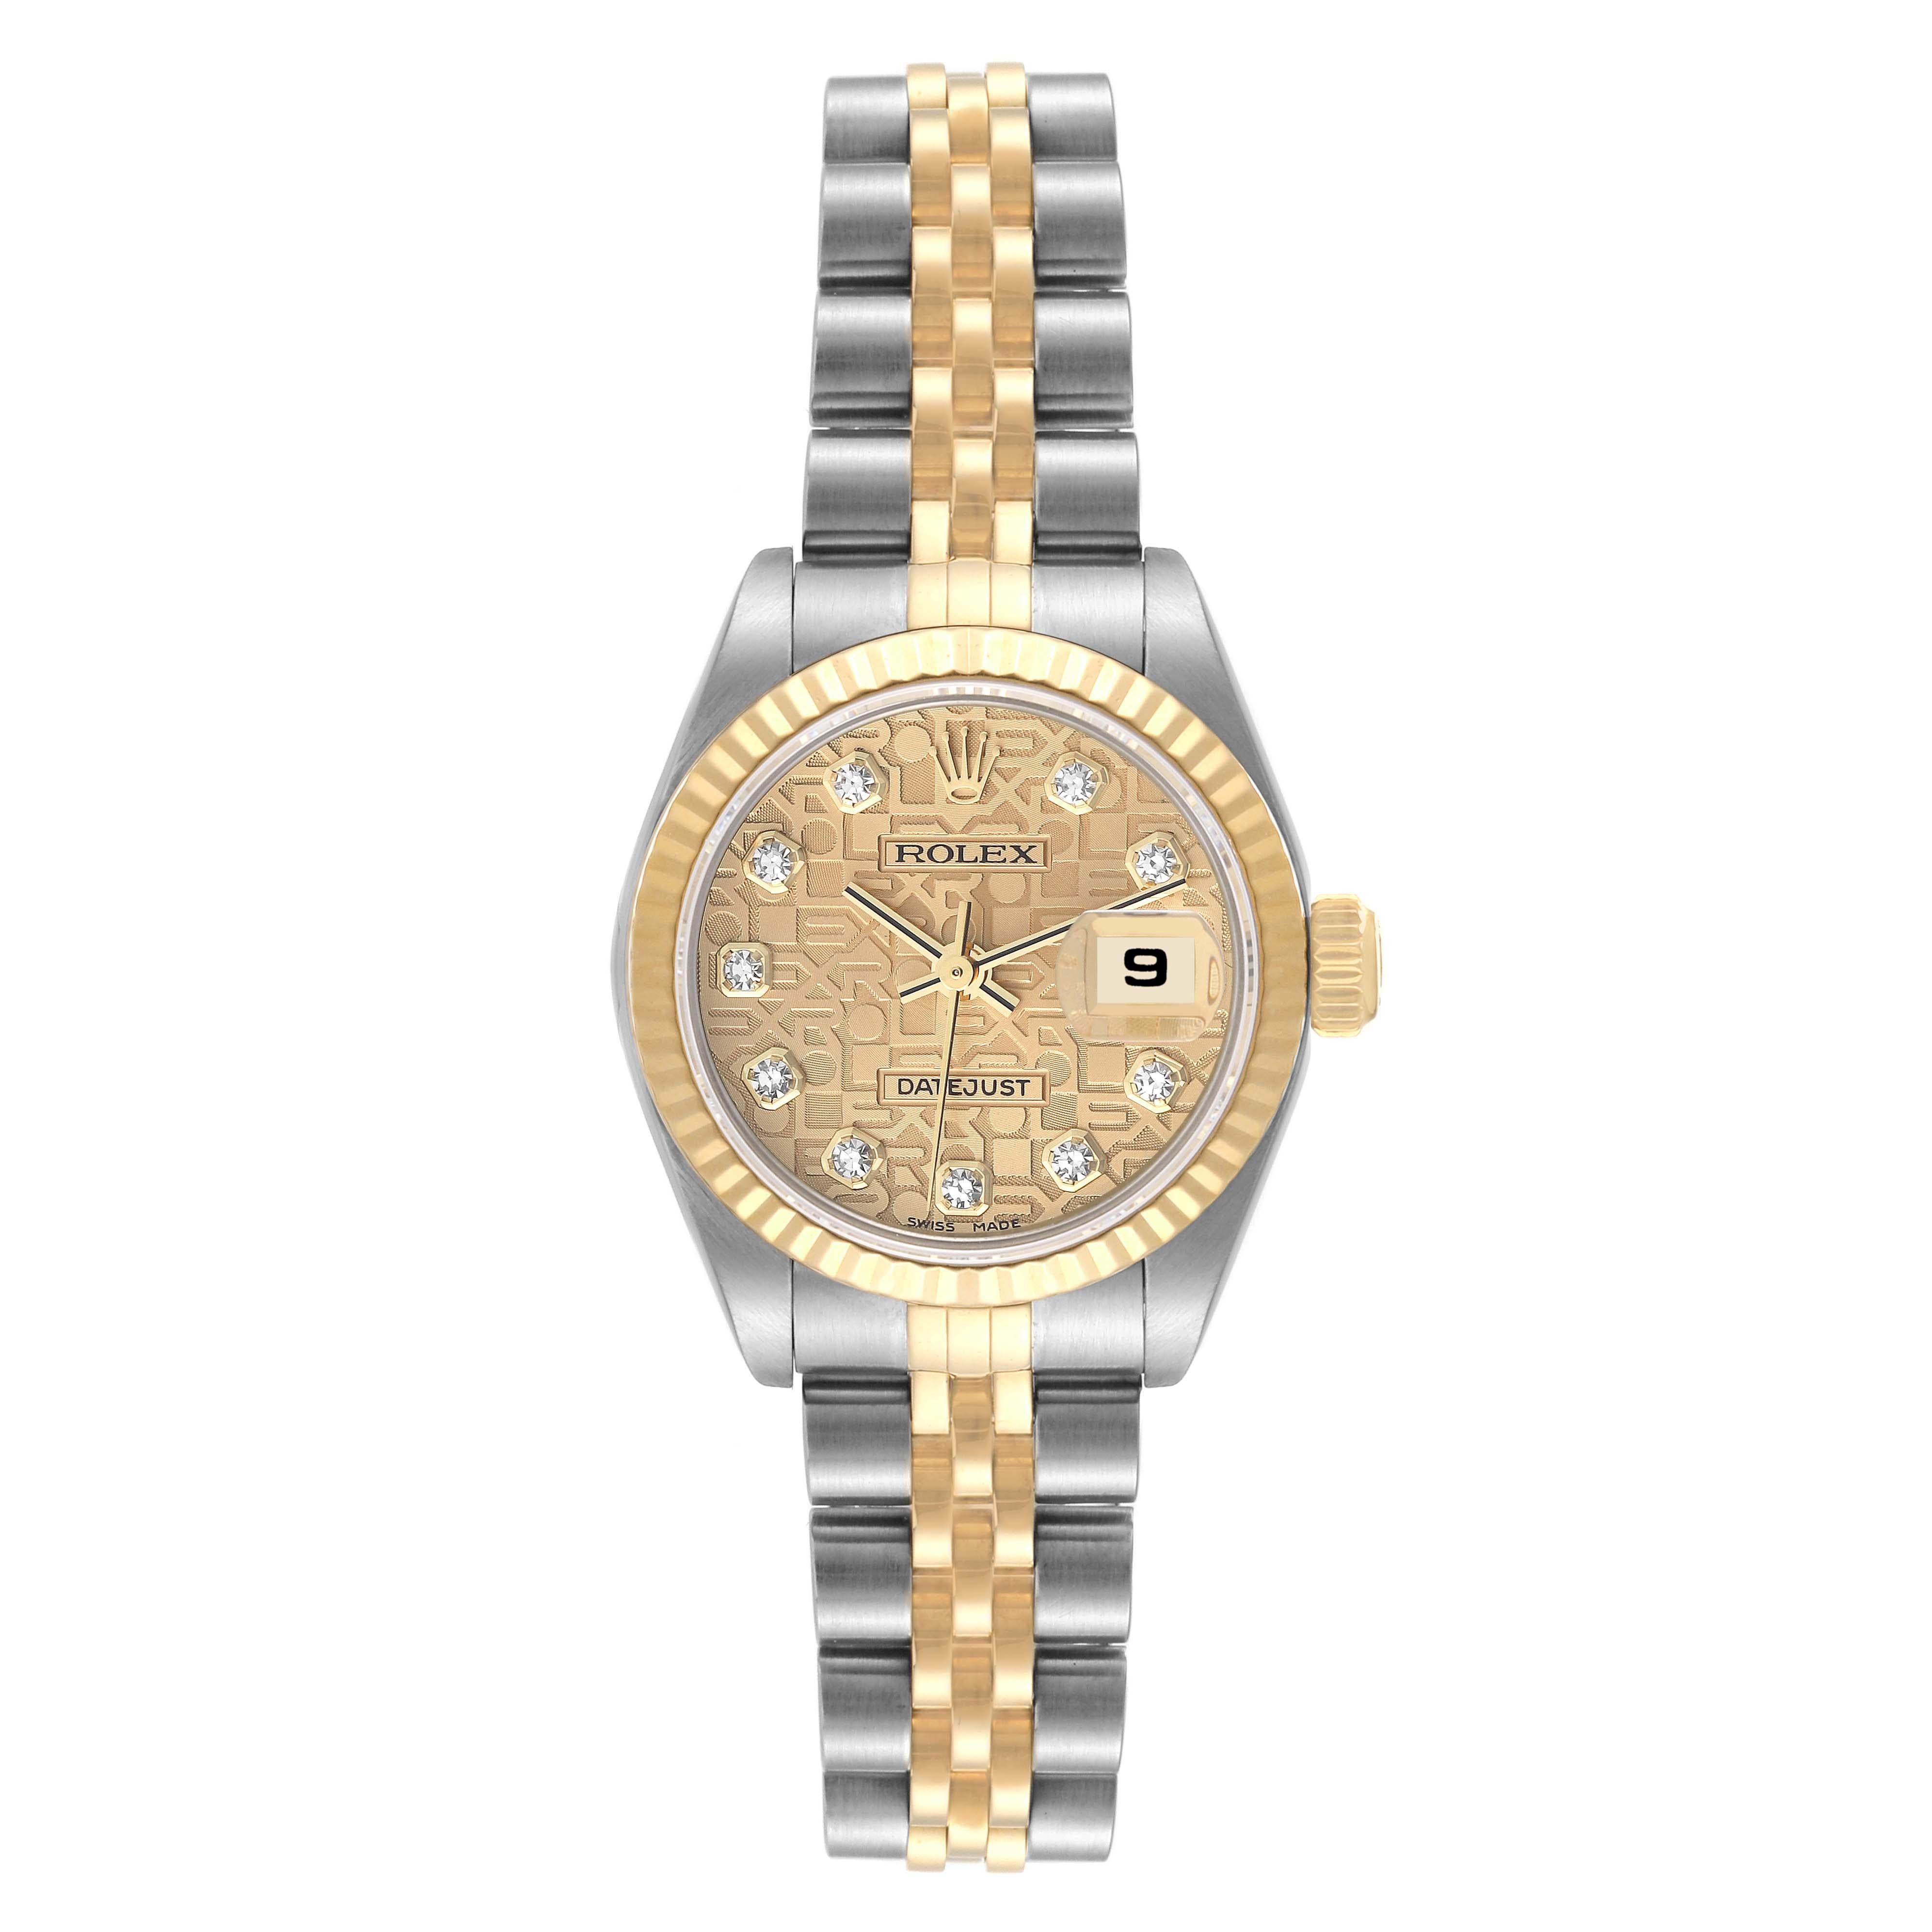 Rolex Datejust Steel Yellow Gold Diamond Dial Ladies Watch 79173 Box Papers. Officially certified chronometer automatic self-winding movement. Stainless steel oyster case 26.0 mm in diameter. Rolex logo on an 18K yellow gold crown. 18k yellow gold